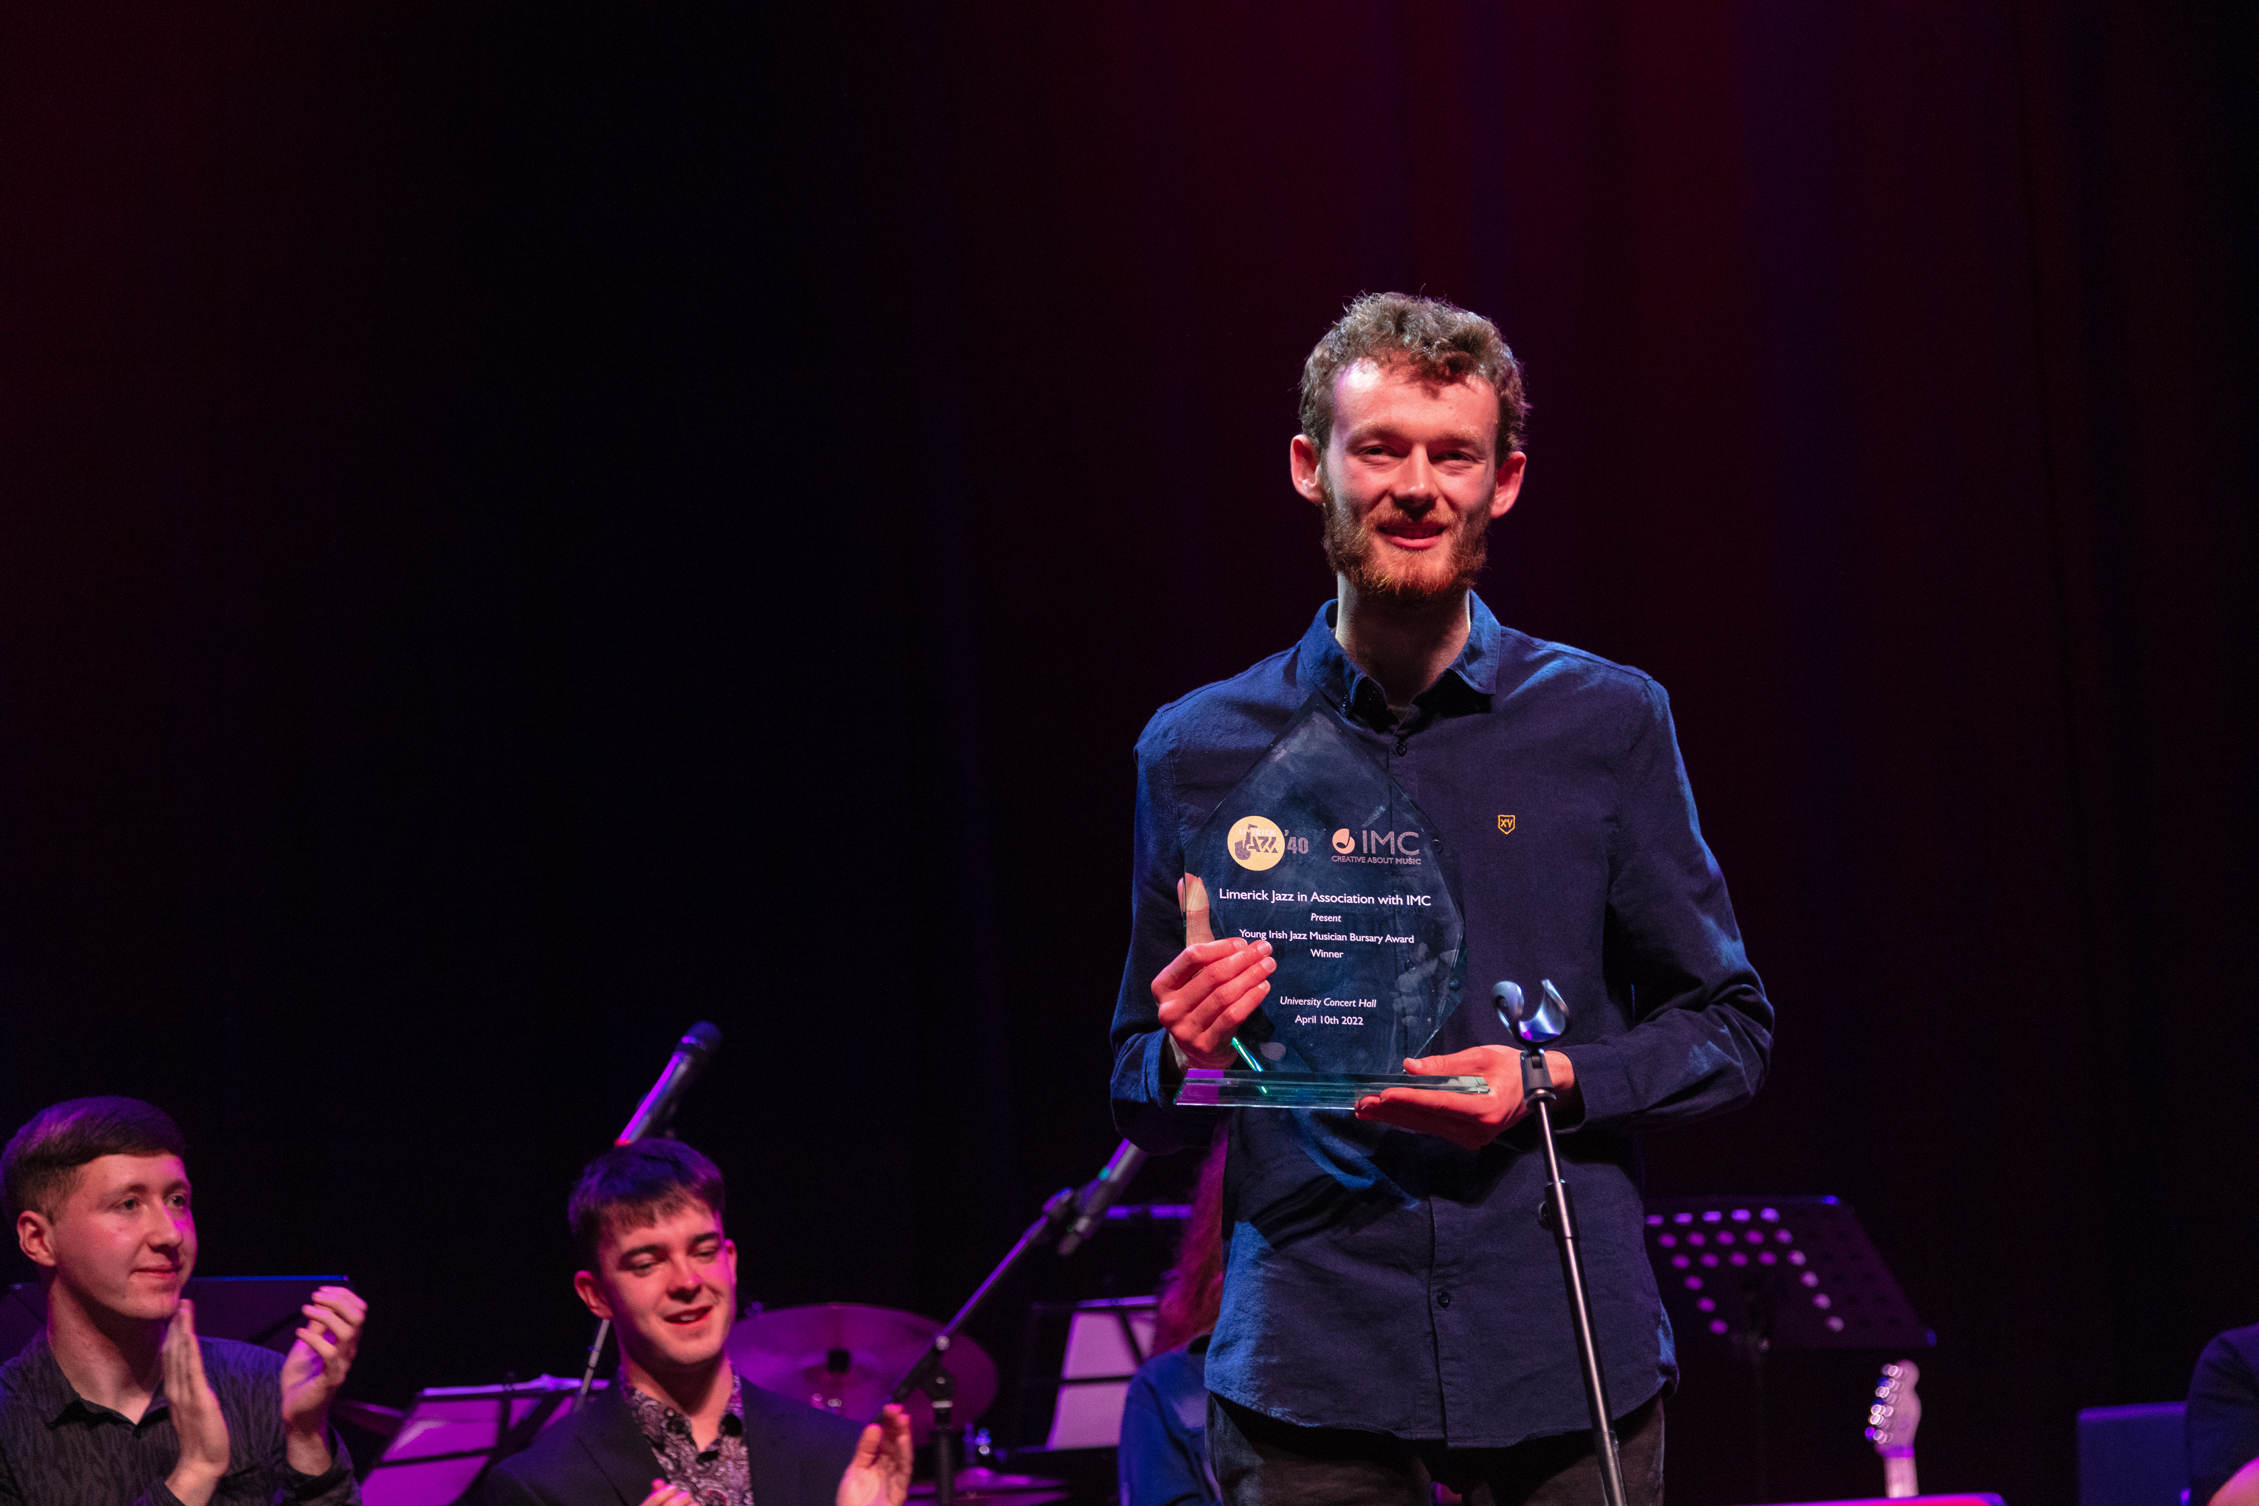 Nils Kavanagh, a 20-year-old jazz pianist from Sligo, became the inaugural recipient of the Young Irish Jazz Musician Award